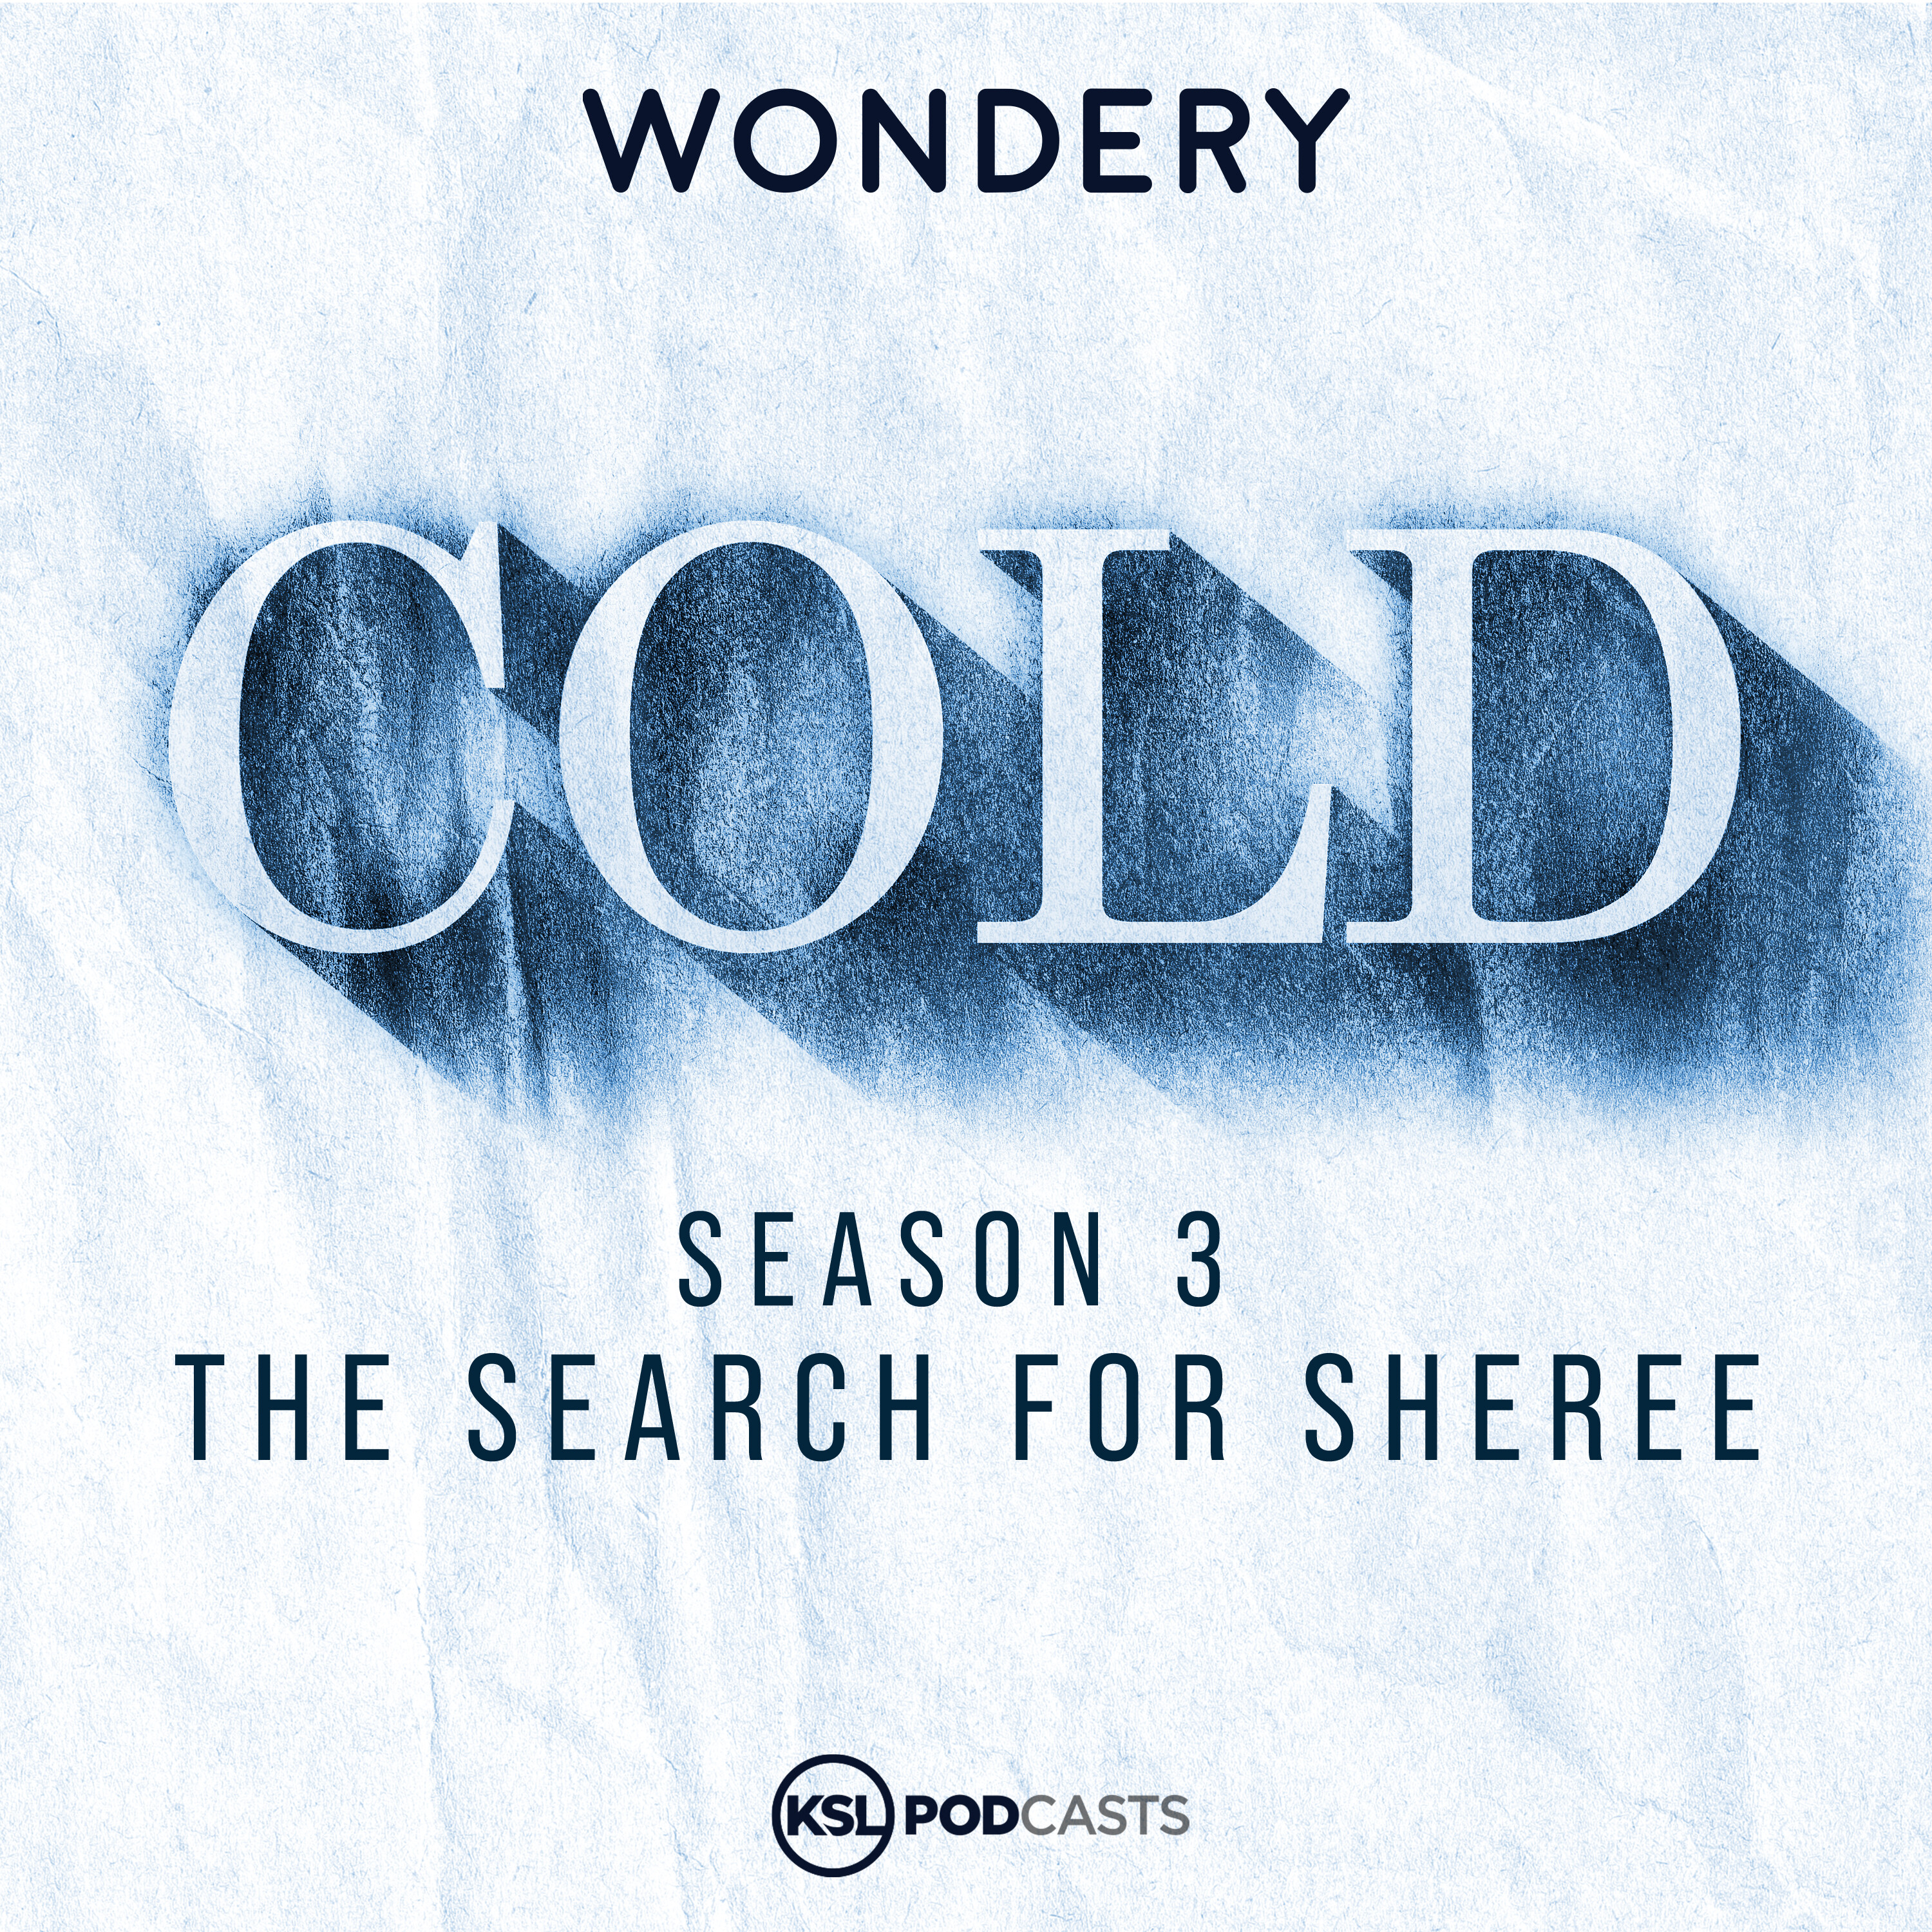 The Search for Sheree | Lying Liars | 6 by KSL Podcasts | Wondery